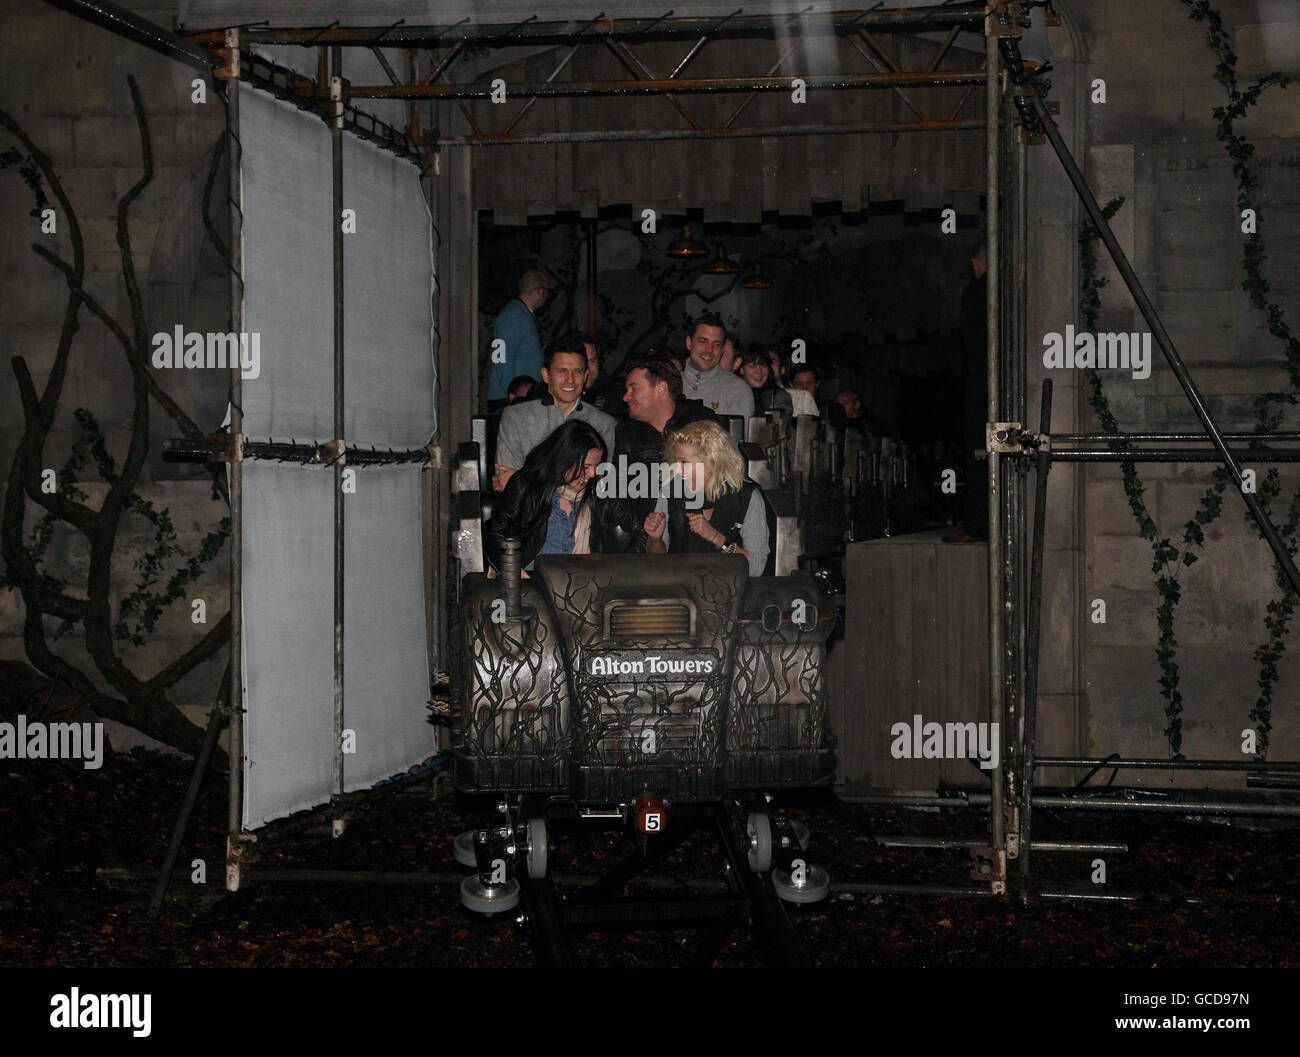 (front right) singer Sarah Harding of Girls Aloud, during a preview ride of the world's first free fall drop rollercoaster,Th13teen, which opened to the public on Saturday 20th March 2010 at Alton Towers, Staffordshire. 19/03/10 Stock Photo